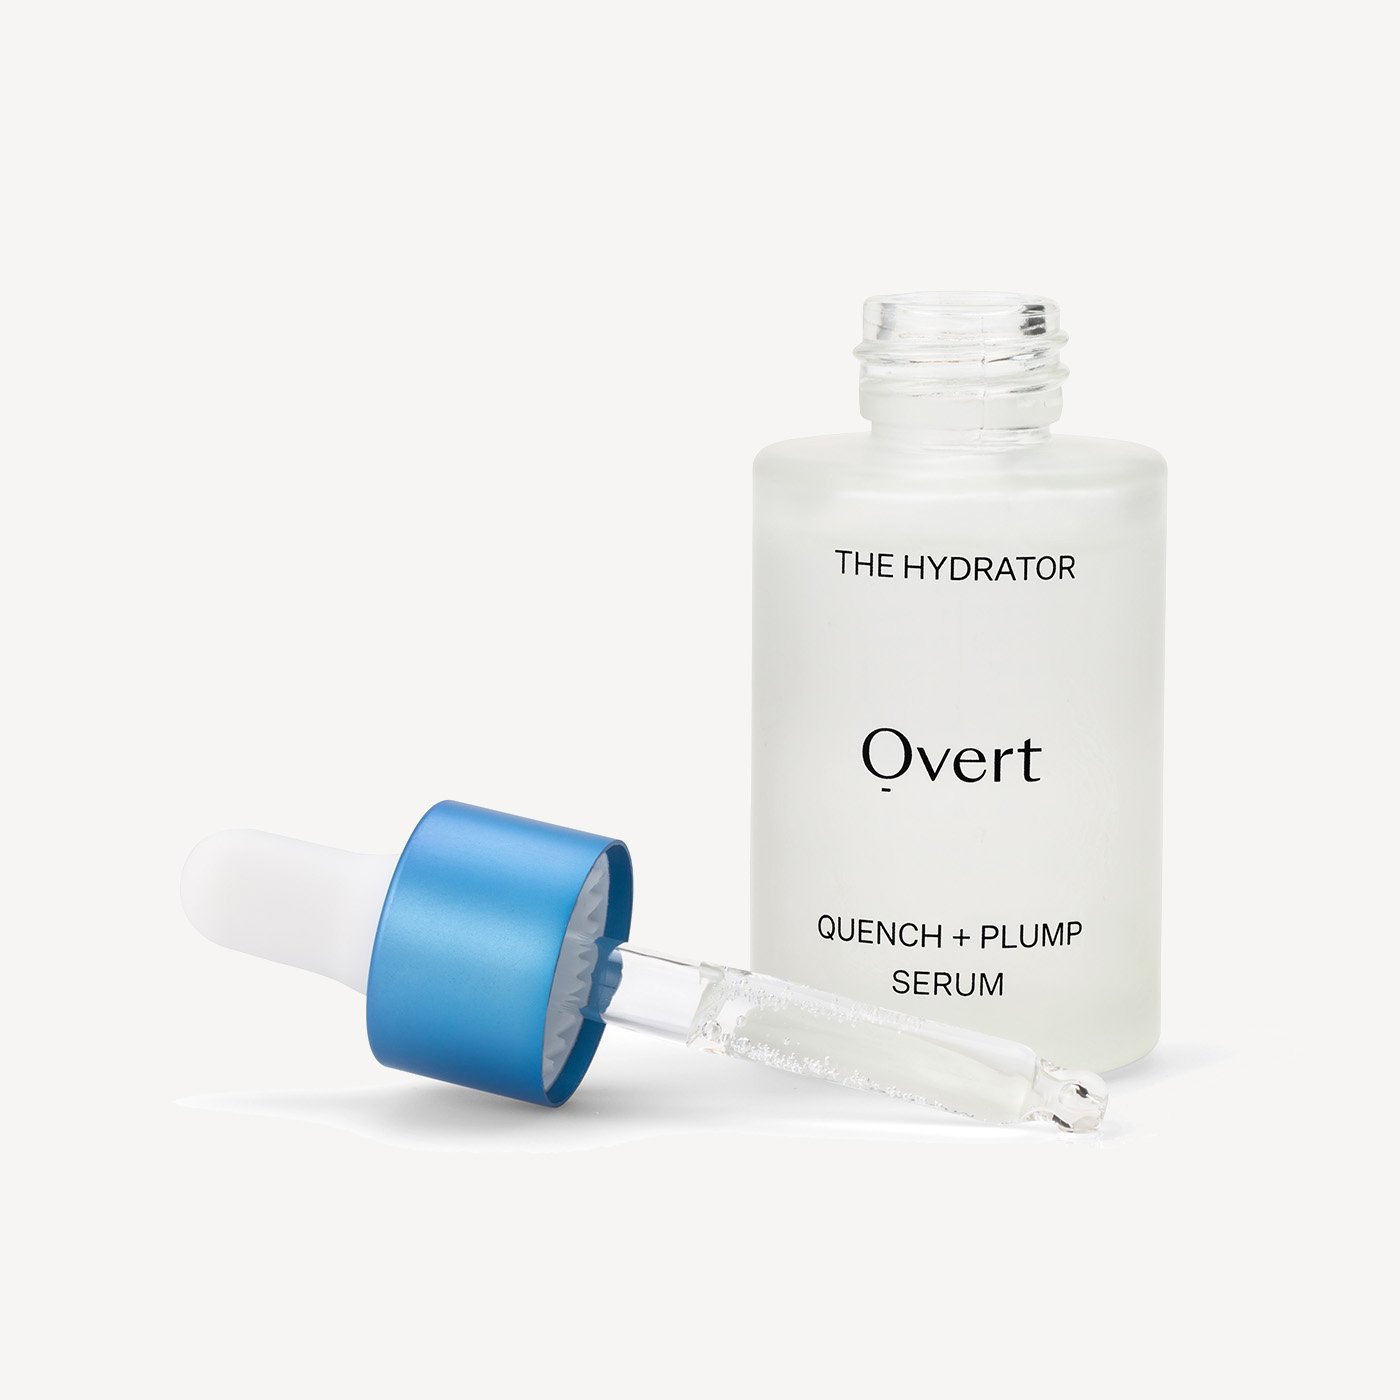 The Hydrator by Overt